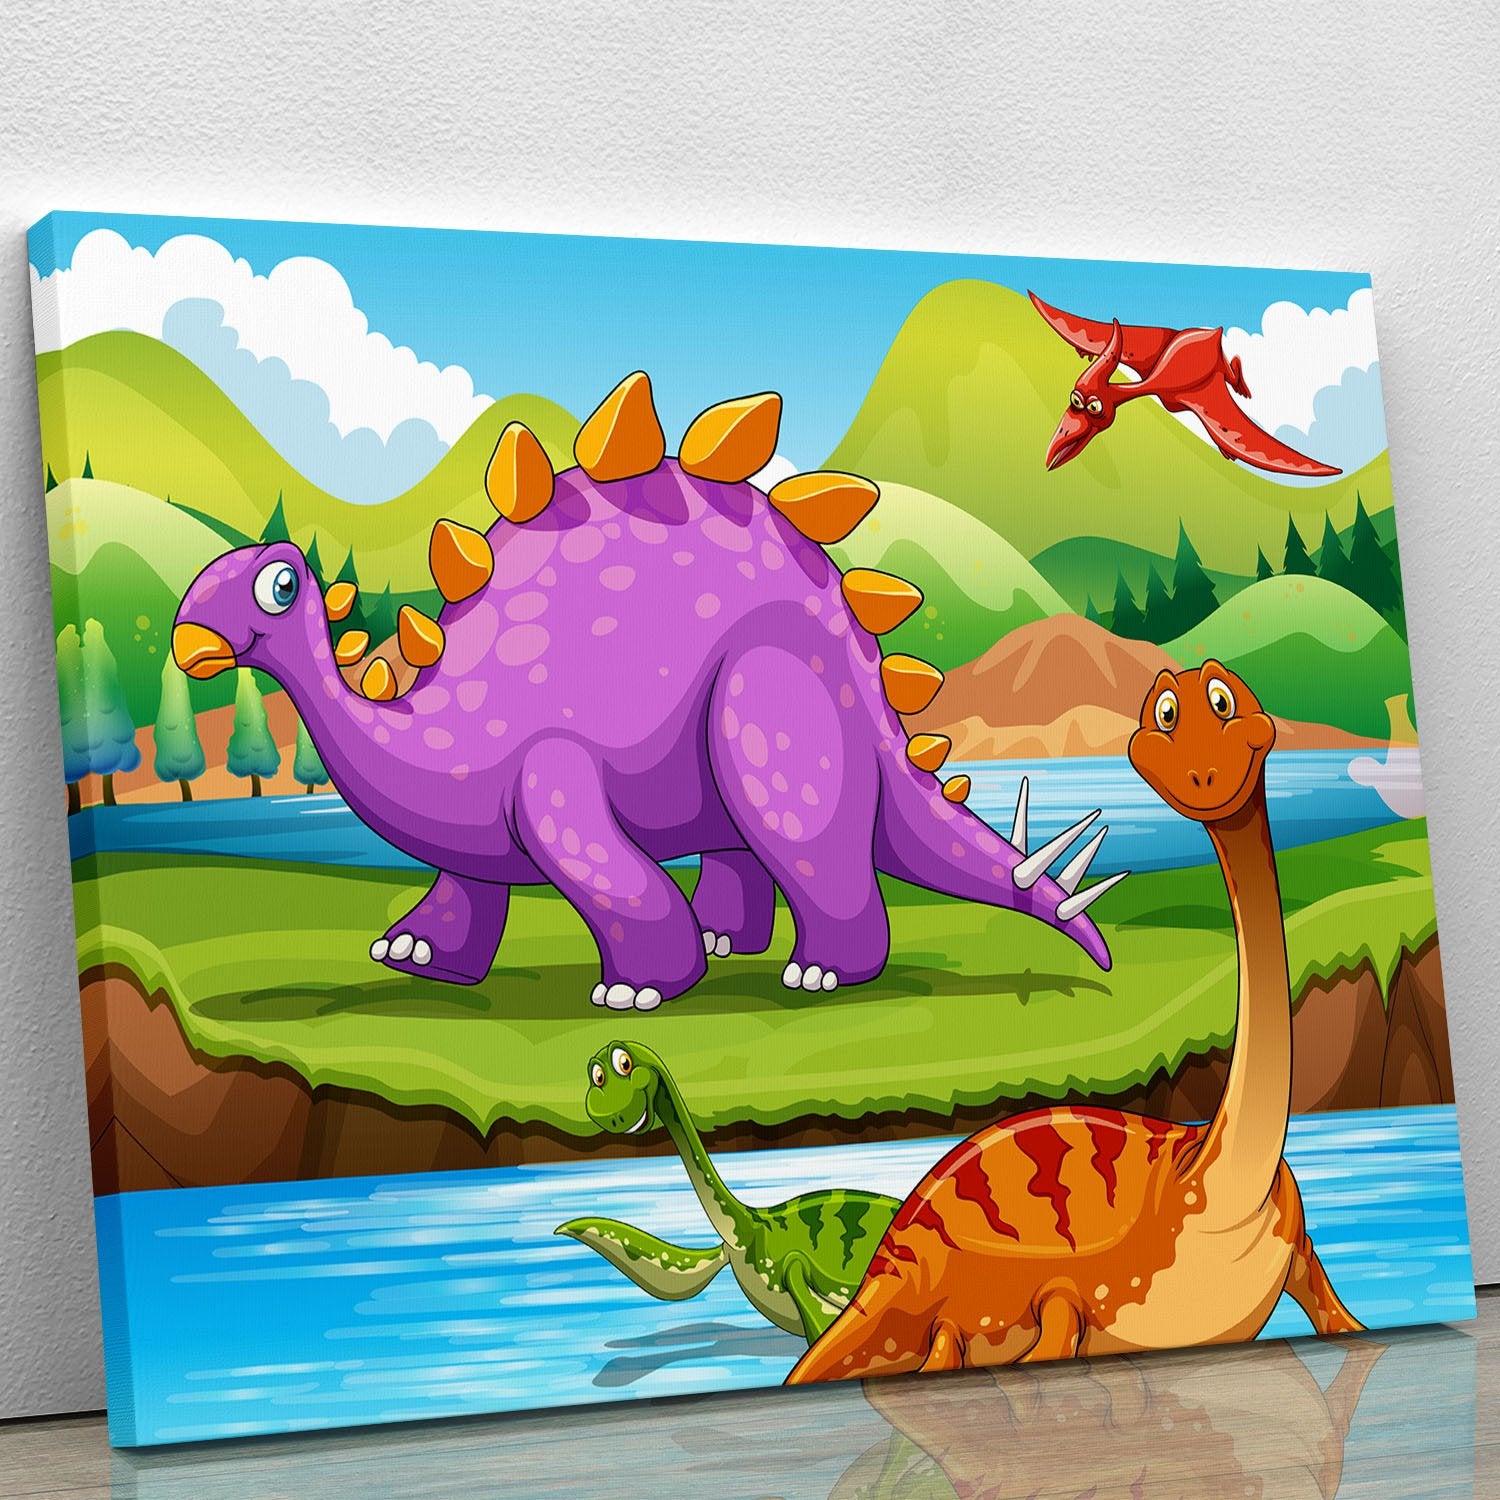 Dinosaurs living by the river Canvas Print or Poster